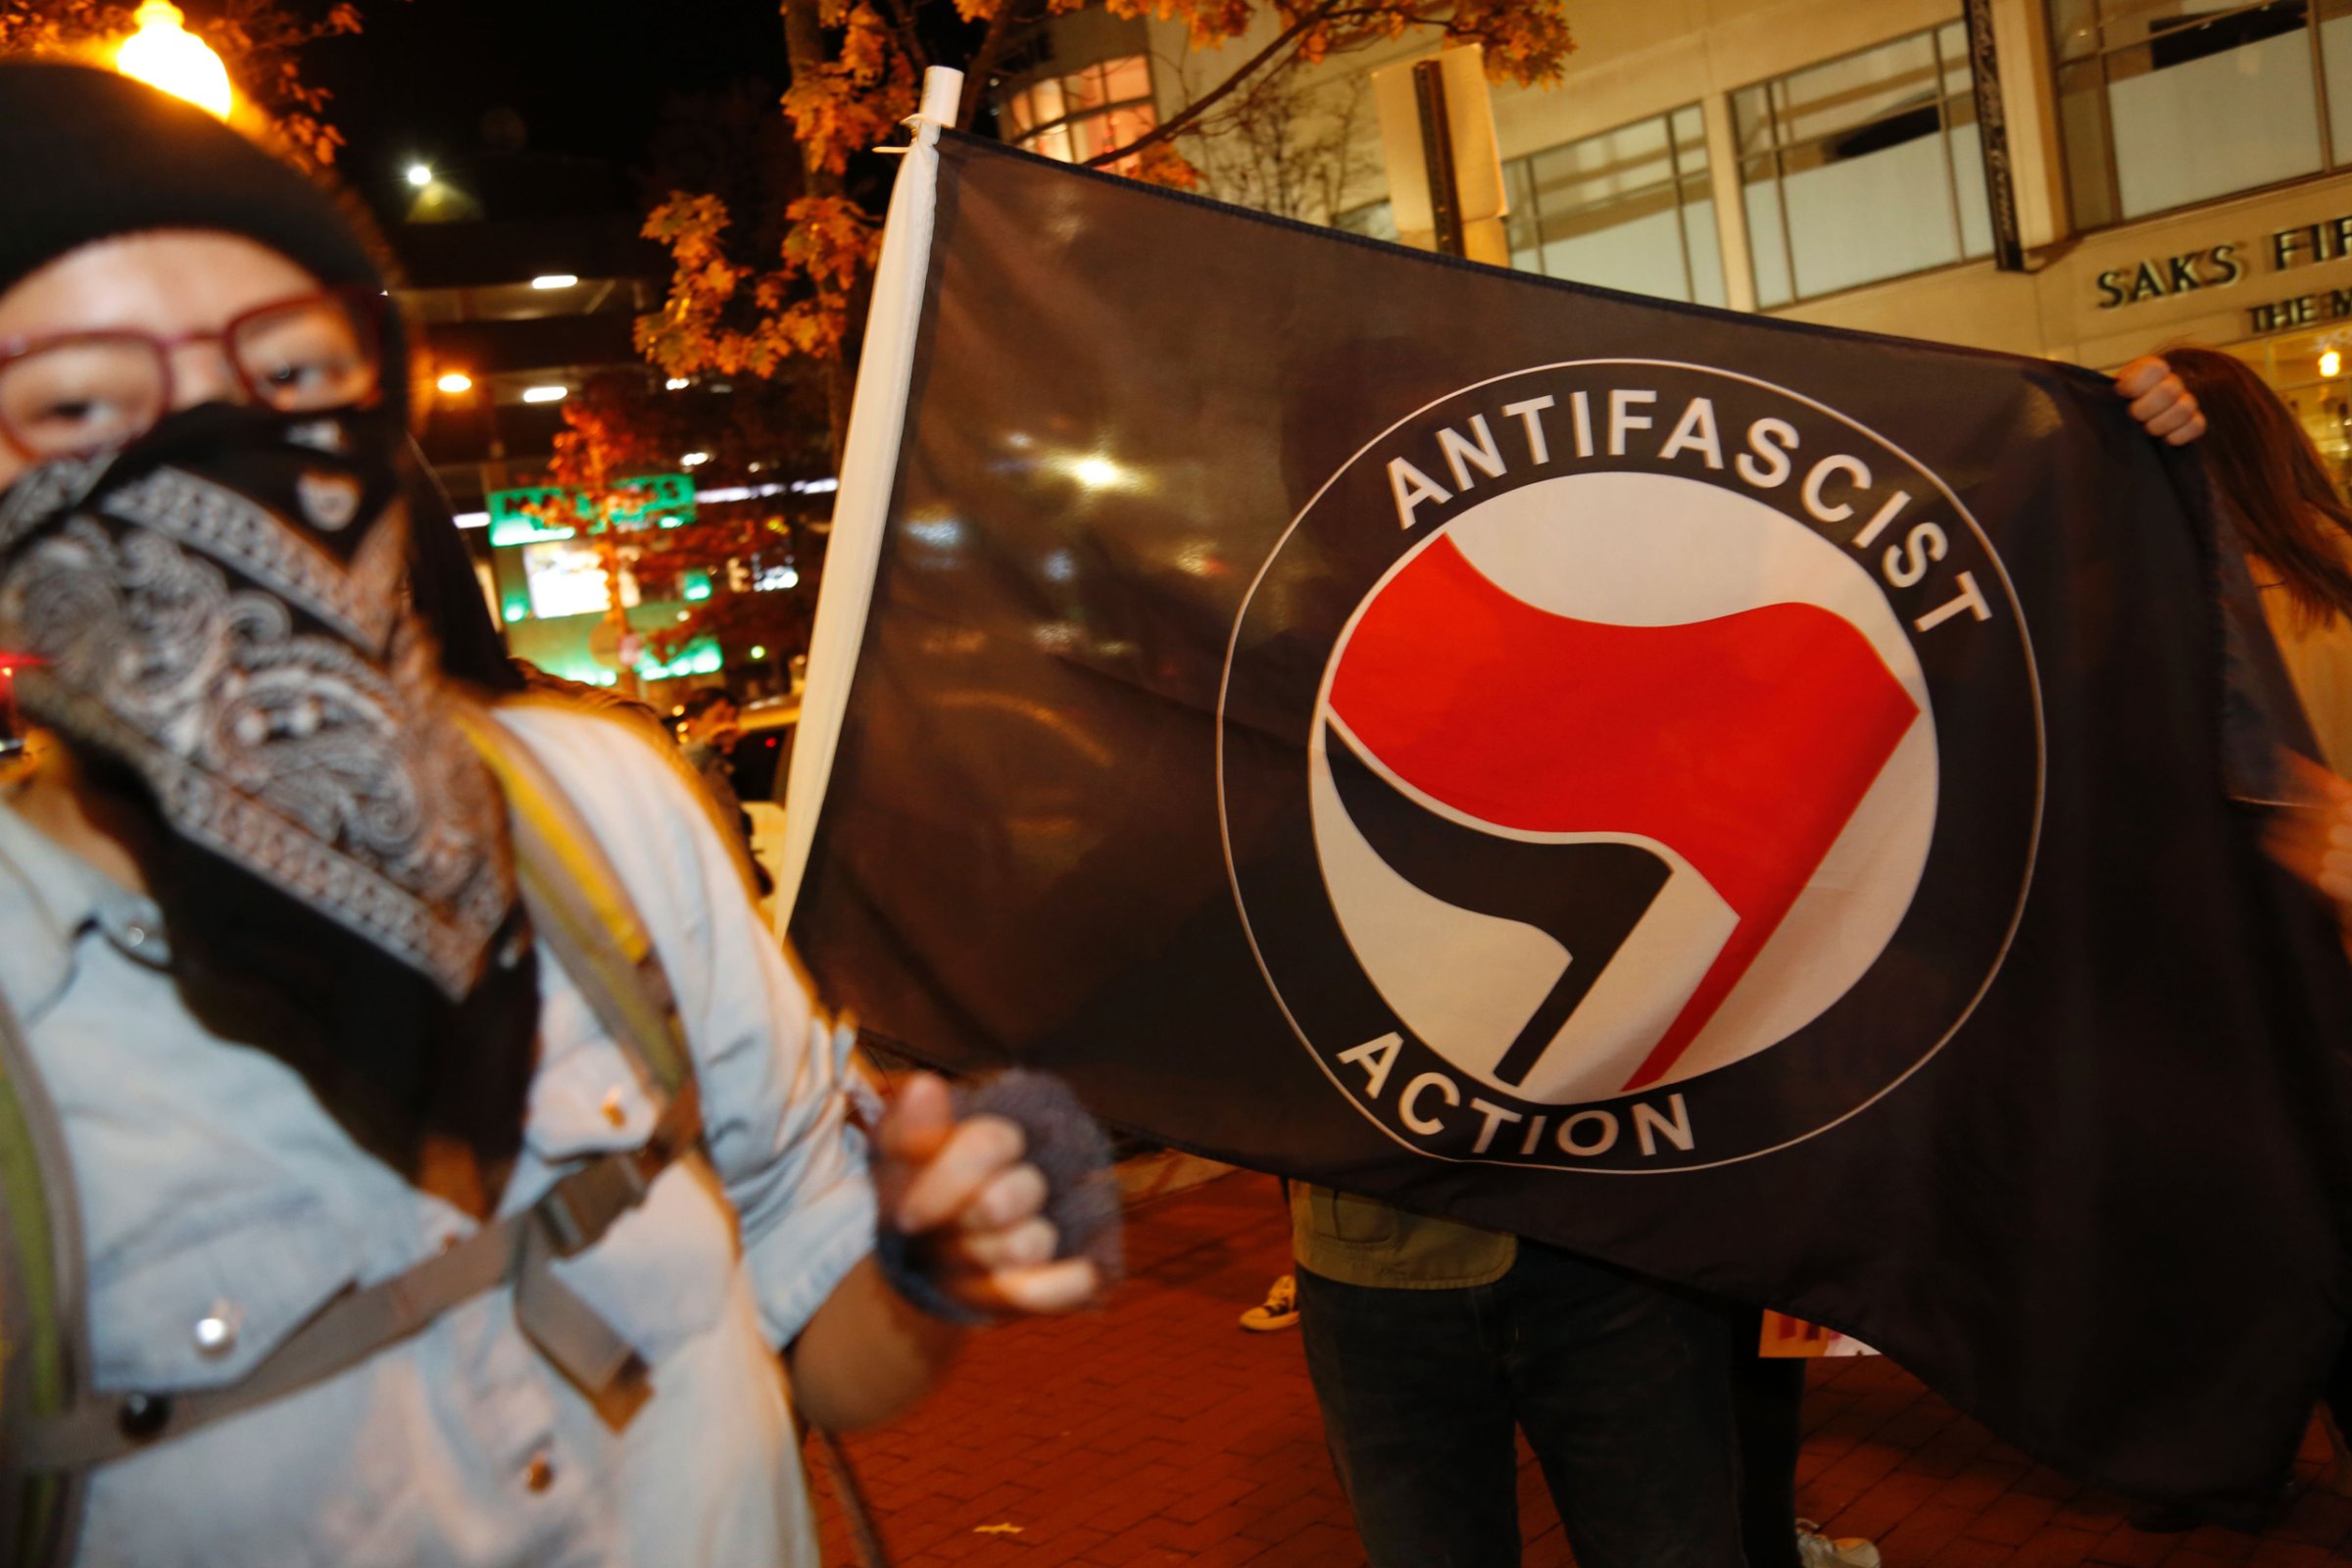 Members of DC Antifascist Coalition protest in opposition to a conference by the National Policy Institute in front of the Magliano's restaurant in Washington, DC on November 18, 2016. / AFP PHOTO / Andrew BirajANDREW BIRAJ/AFP/Getty Images